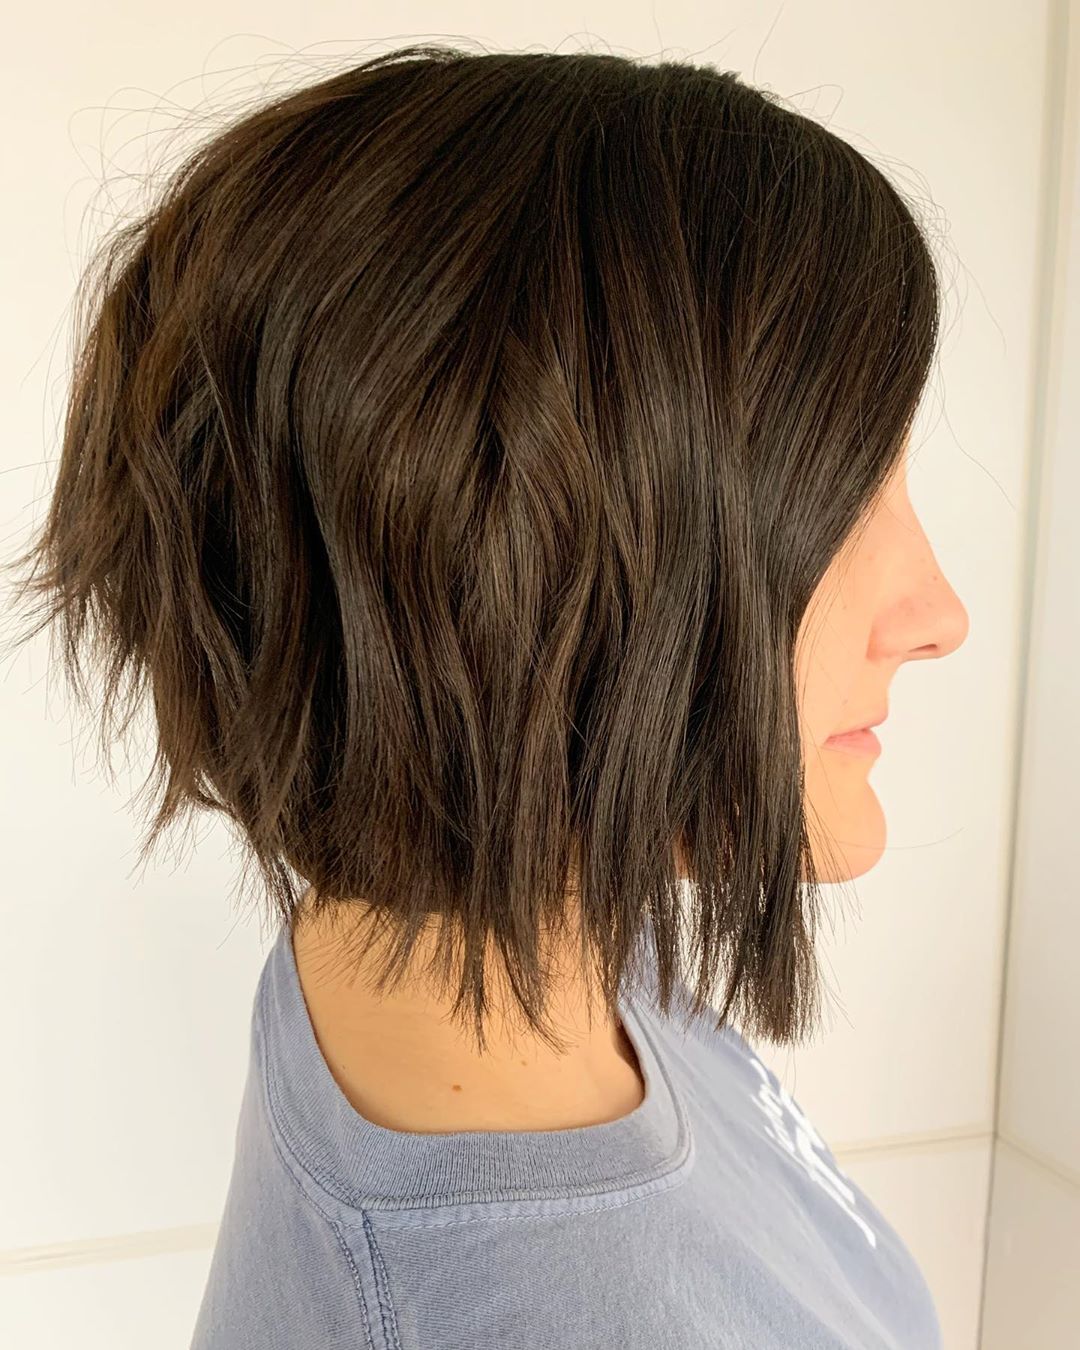 13 Popular Choppy Inverted Bob Haircuts to Consider Trying